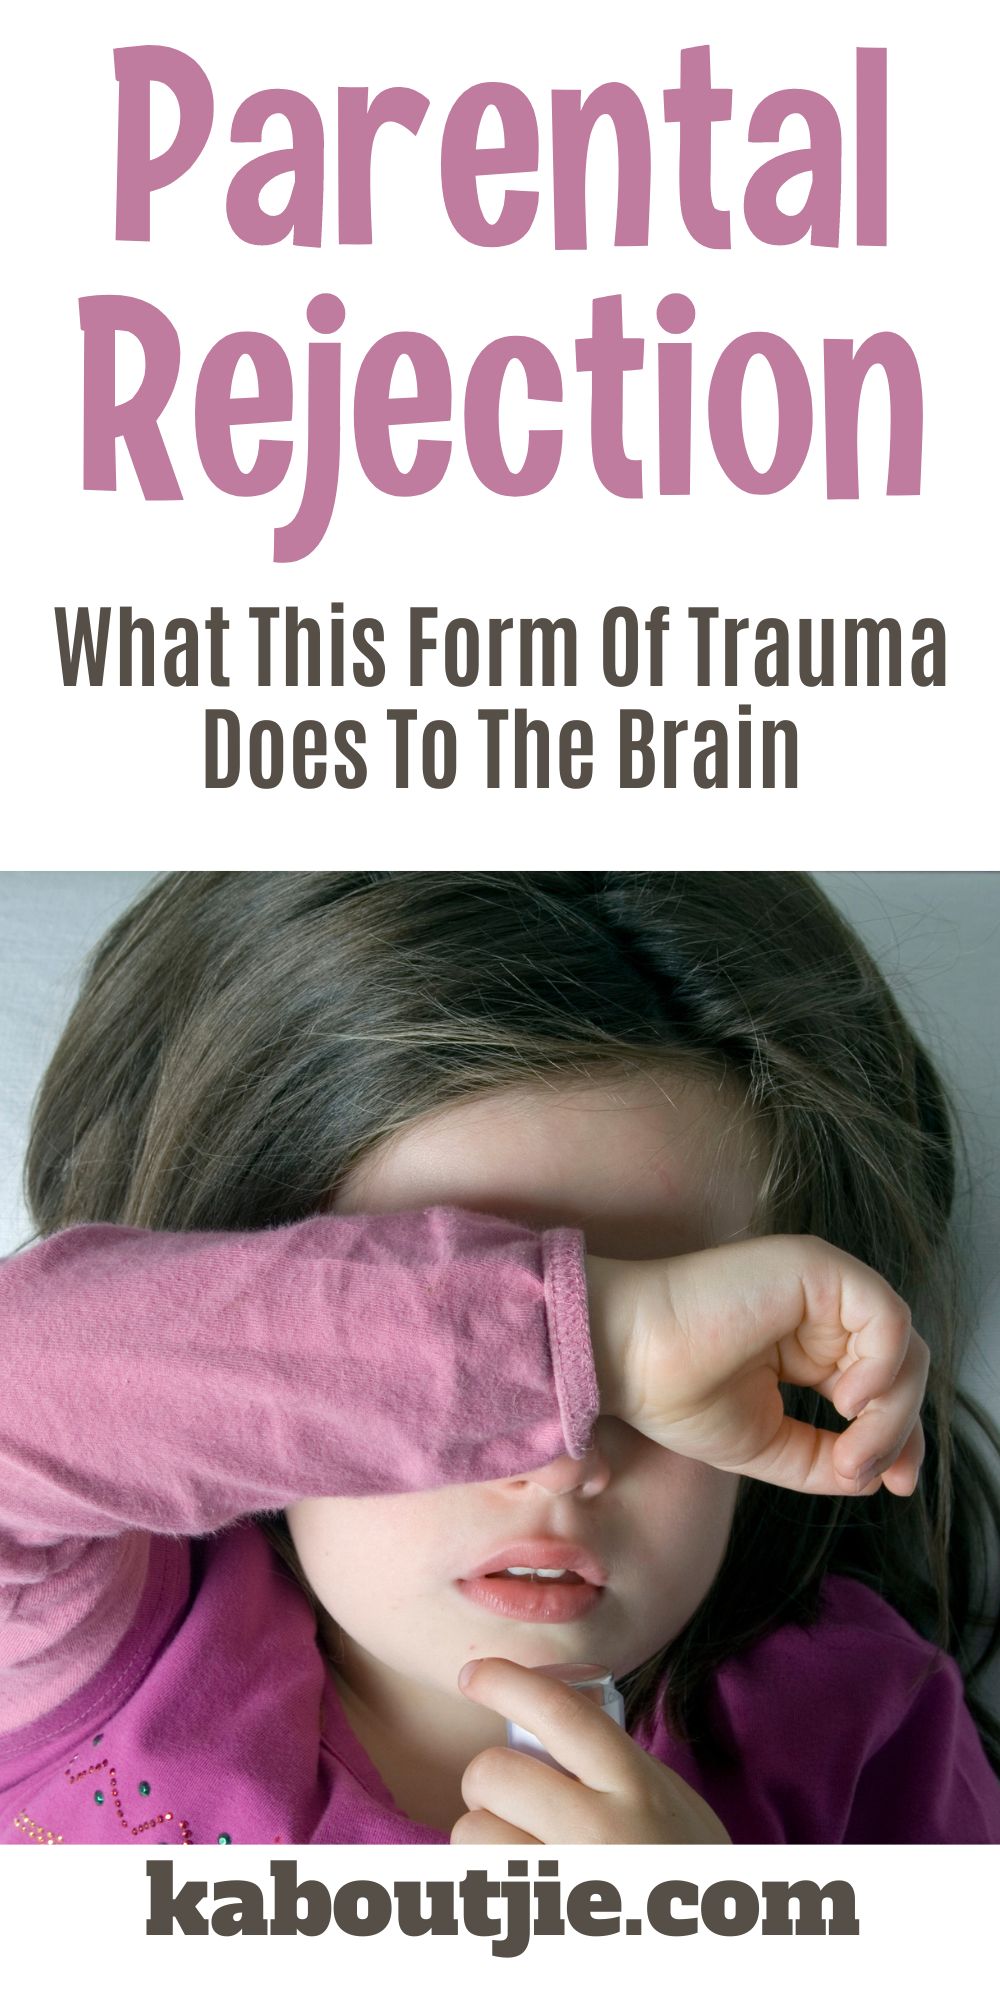 Parental Rejection And What This Form Of Trauma Does To The Brain!